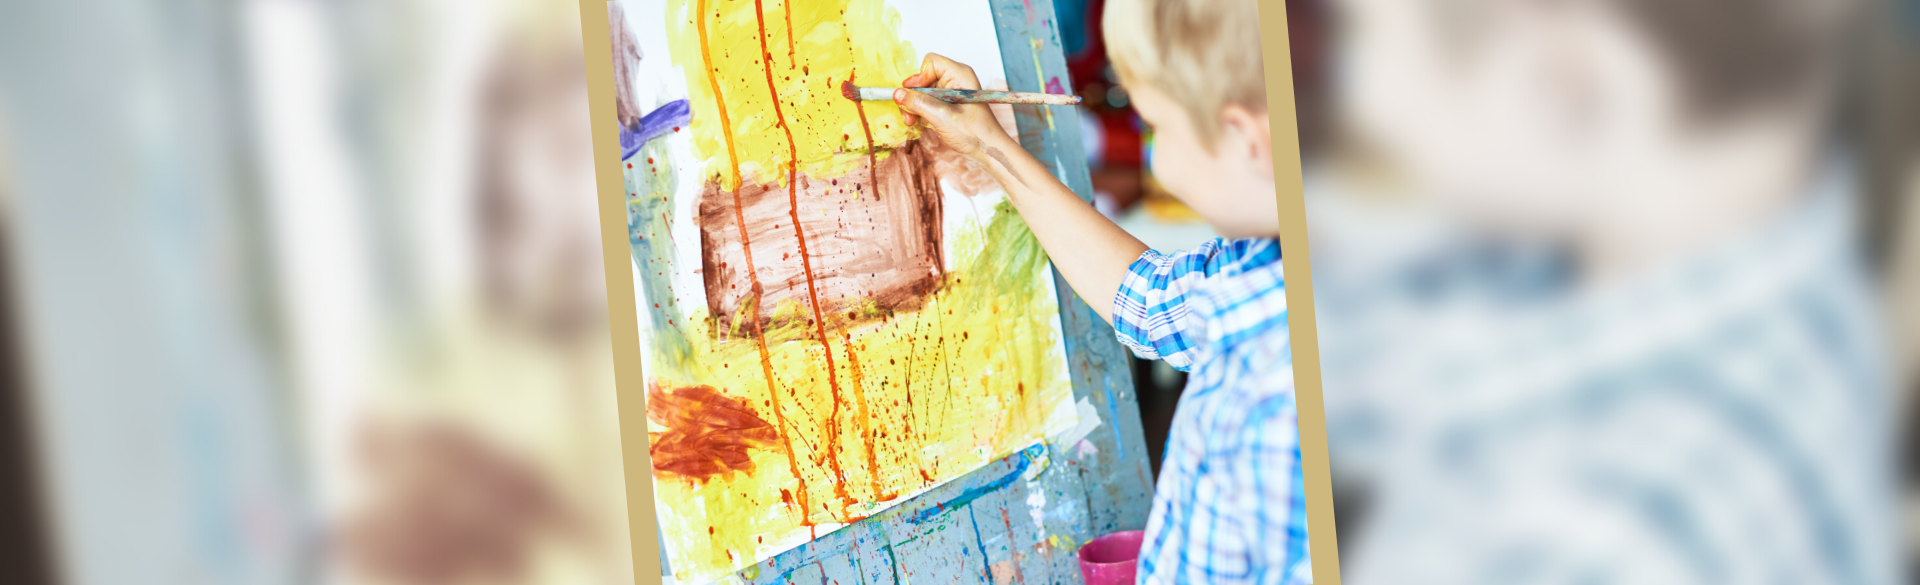 creative arts therapy helps children with cancer through their journey